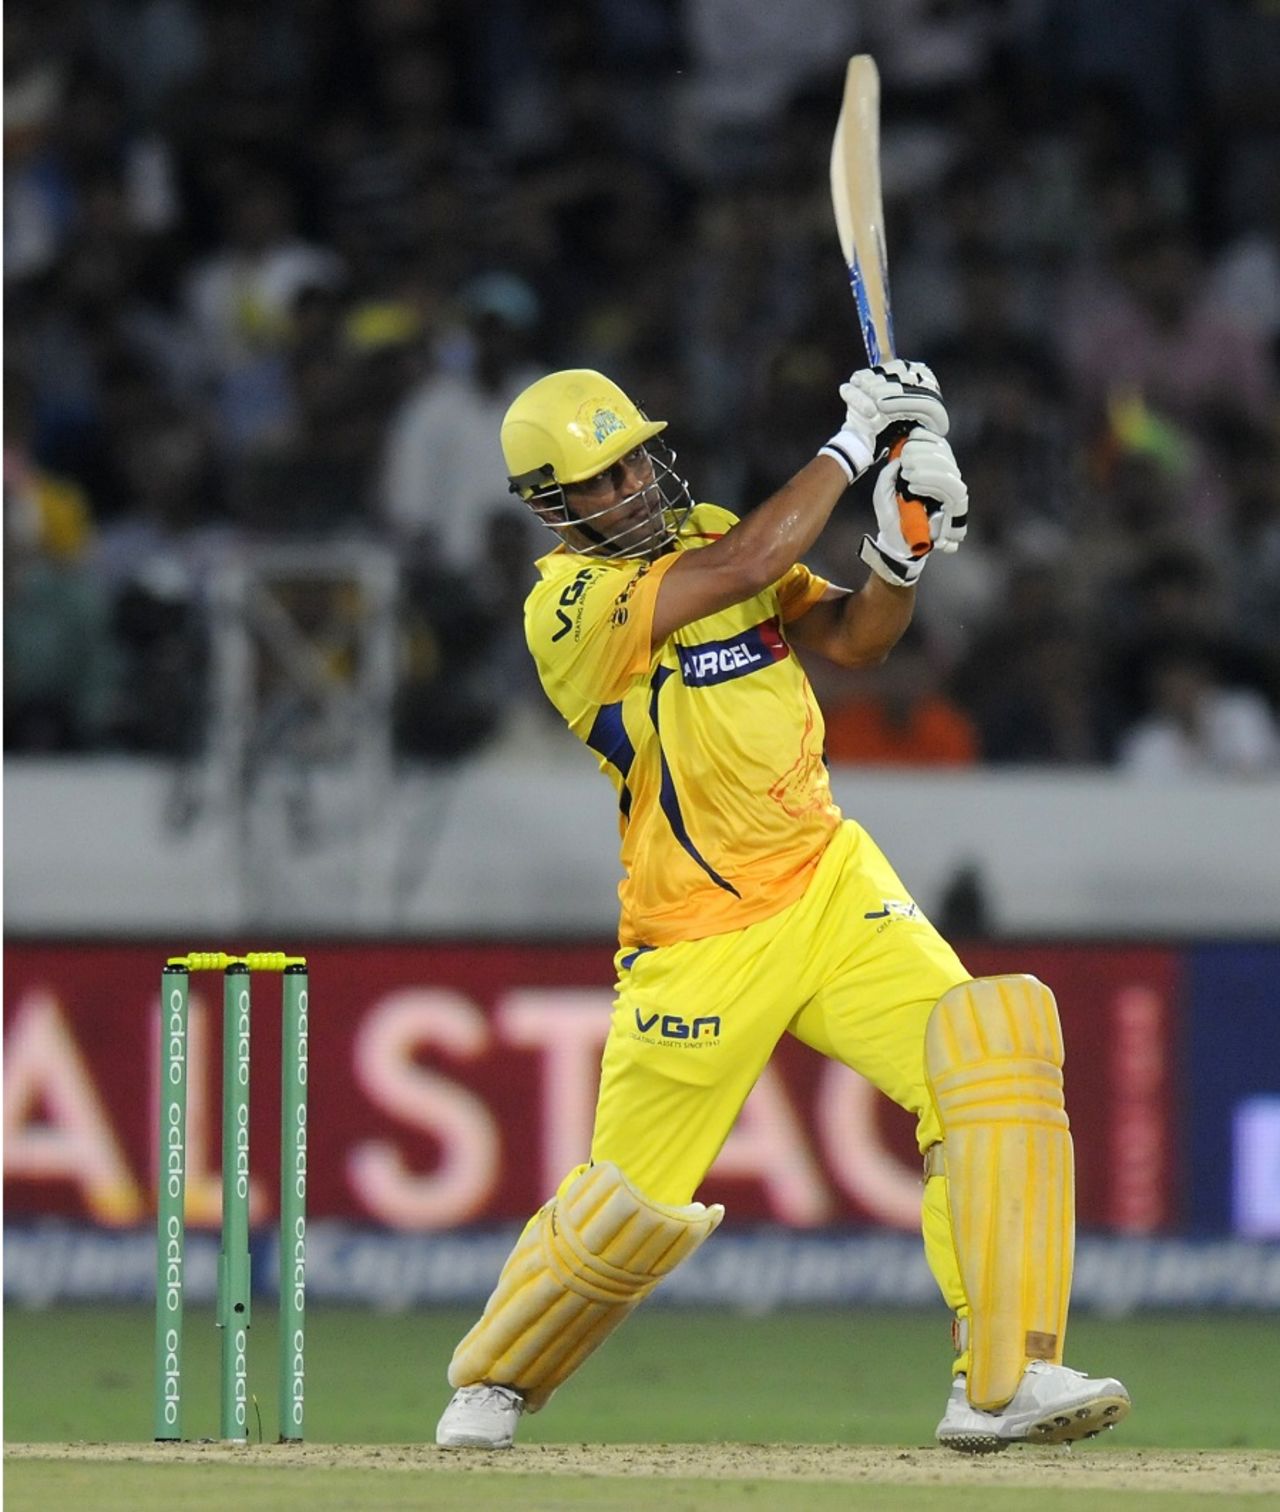 MS Dhoni hammers the ball over the top, Chennai Super Kings v Kolkata Knight Riders, CLT20, Hyderabad, September 17, 2014